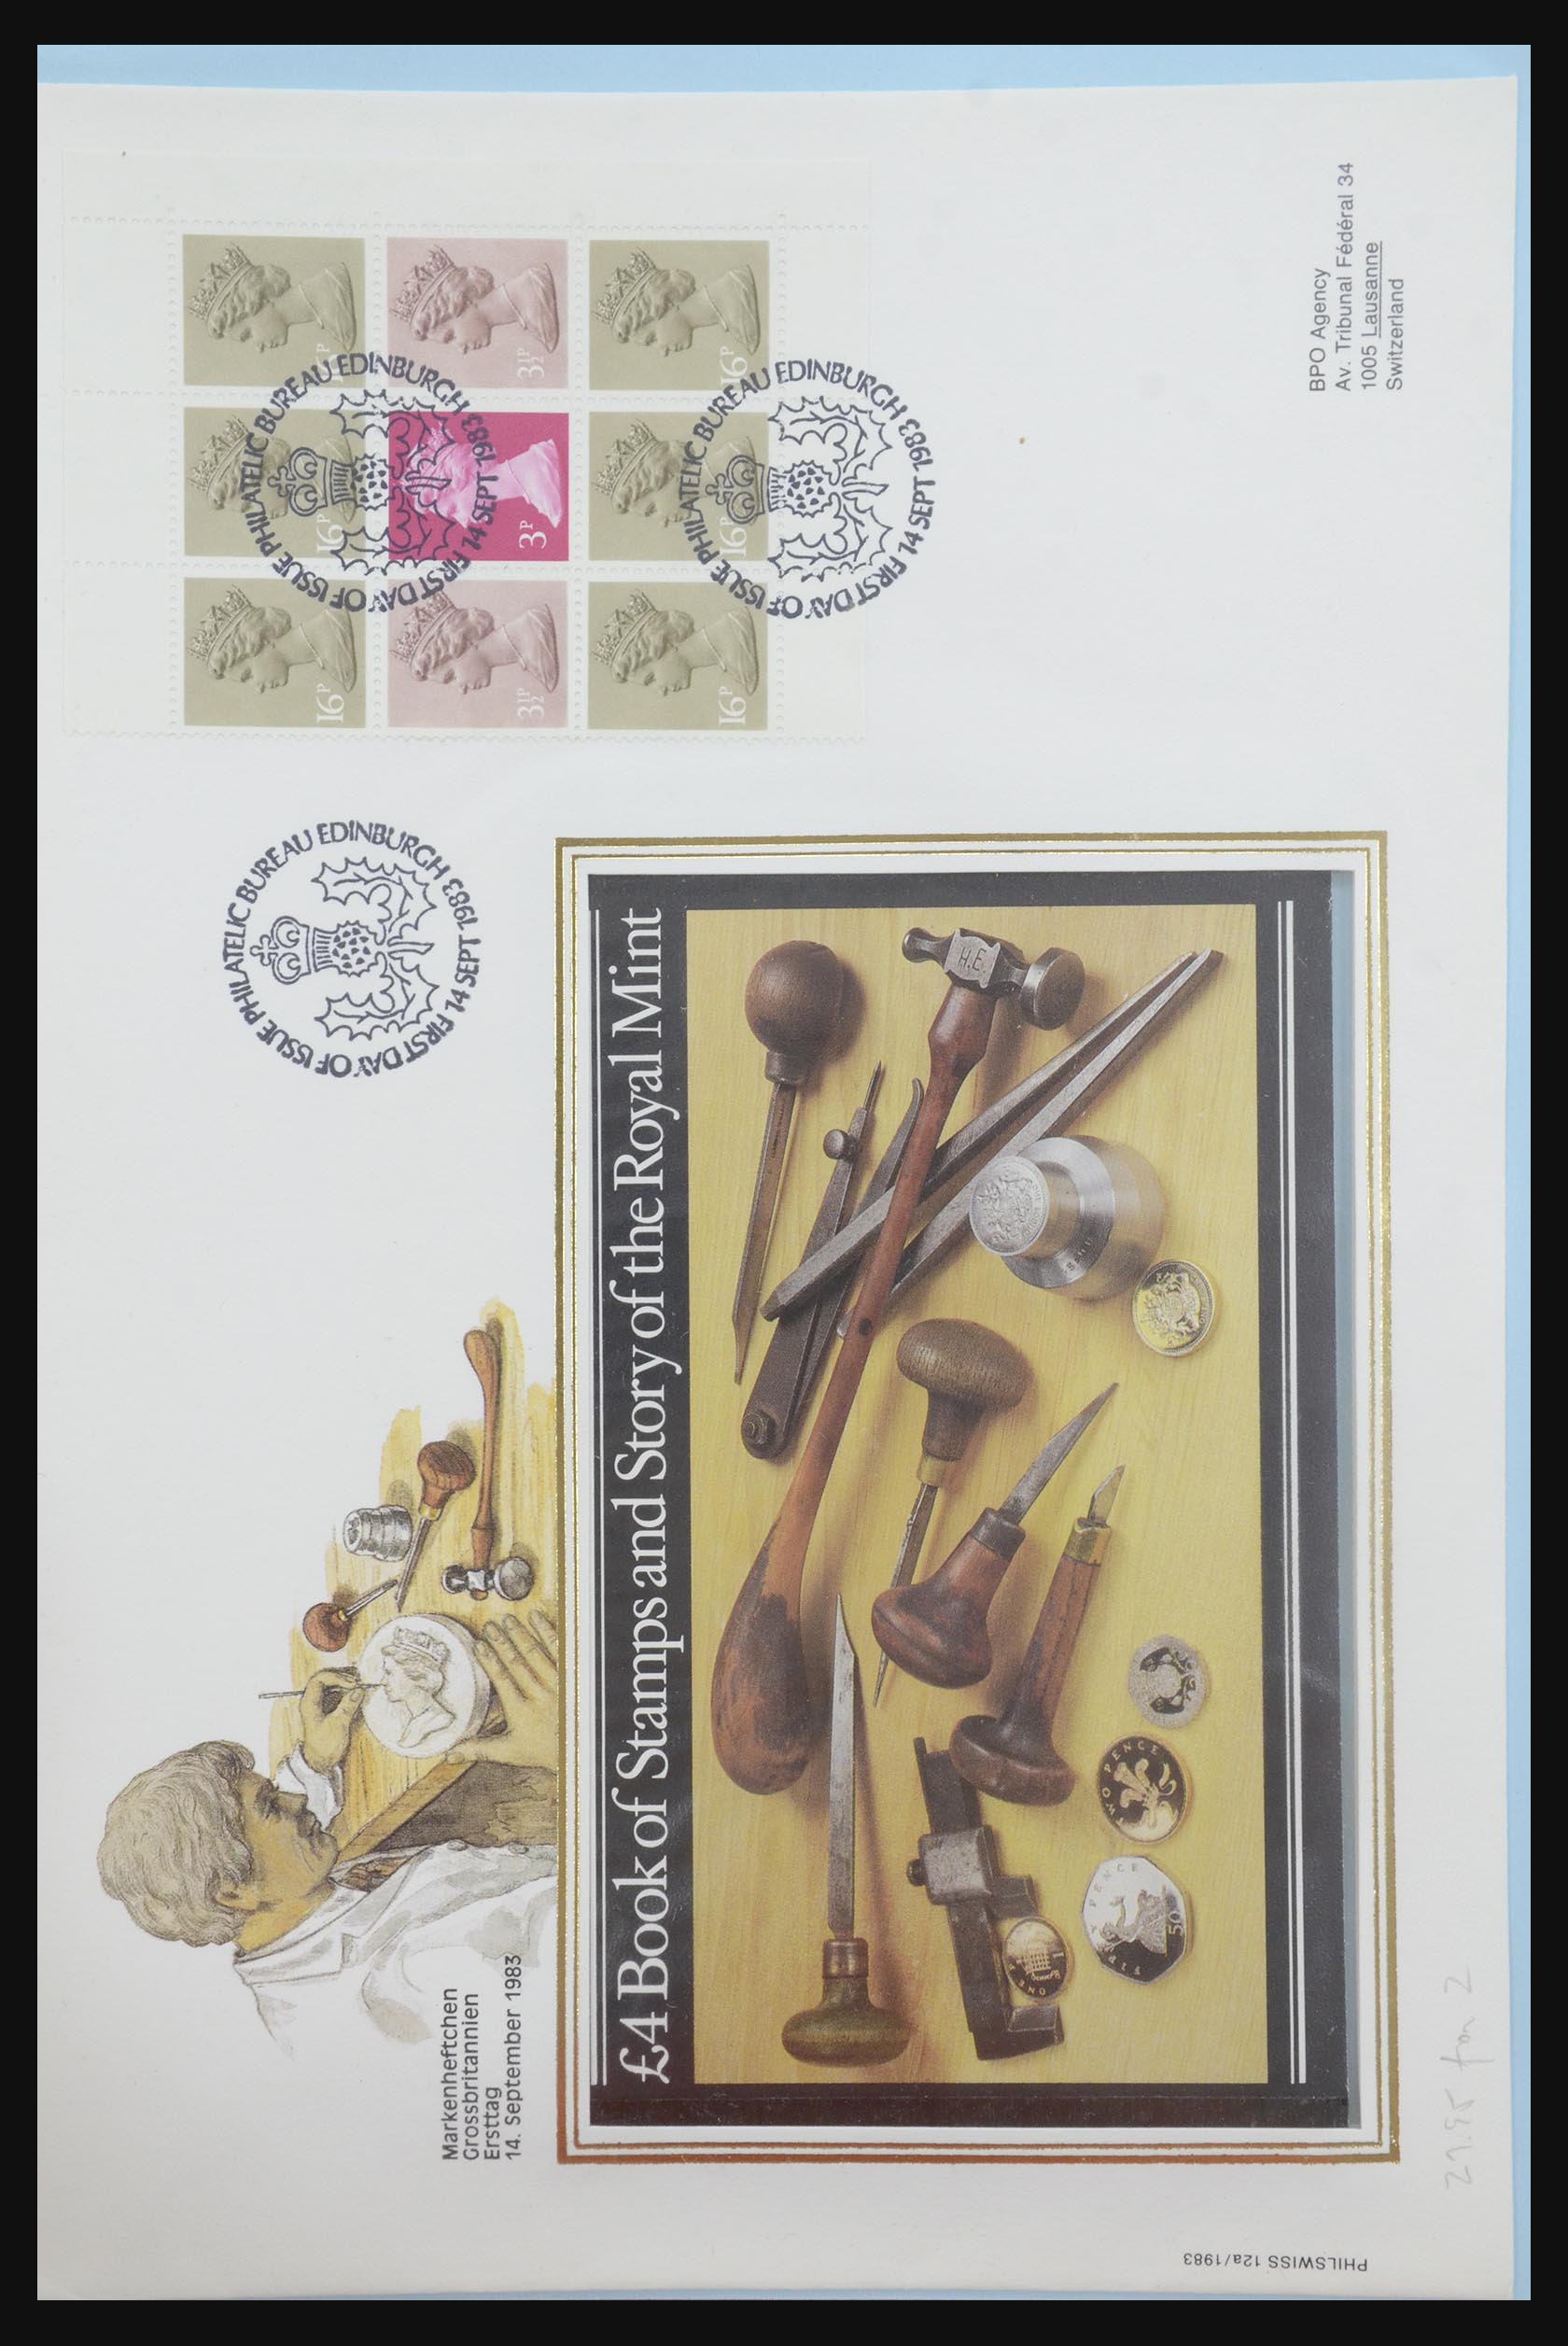 31915 447 - 31915 Western Europe souvenir sheets and stamp booklets on FDC.